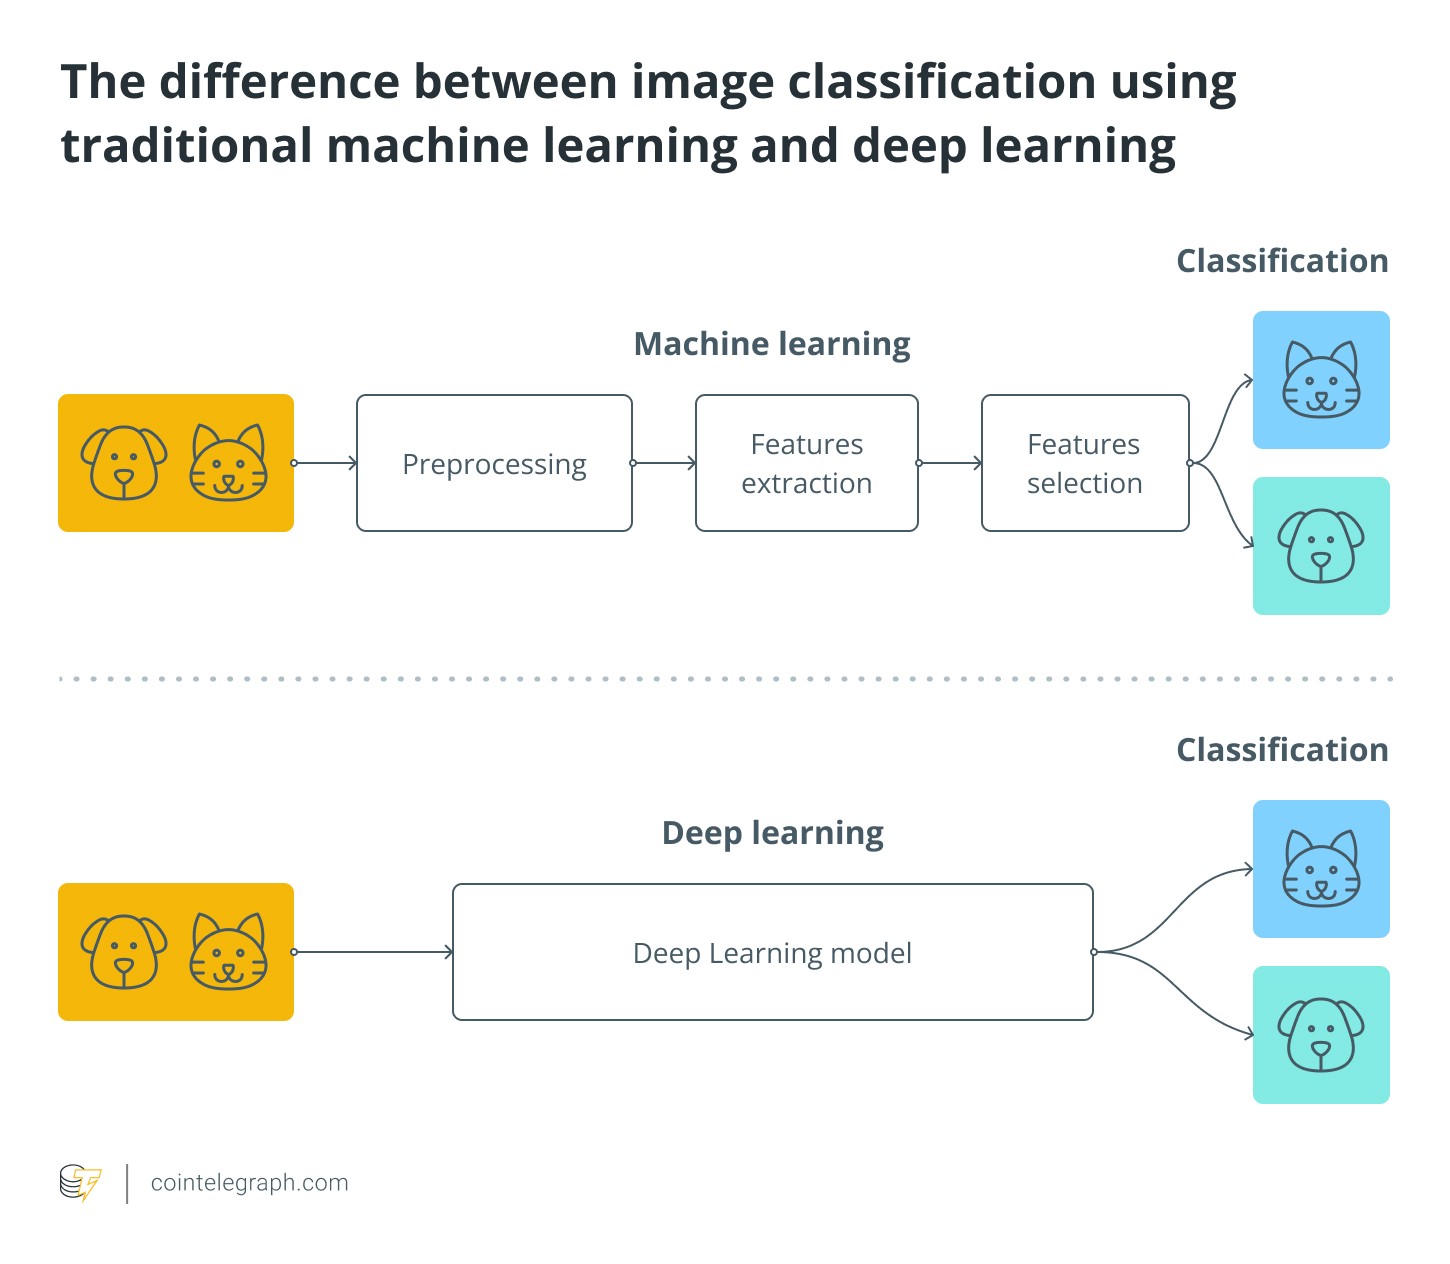 The difference between image classification using traditional machine learning and deep learning